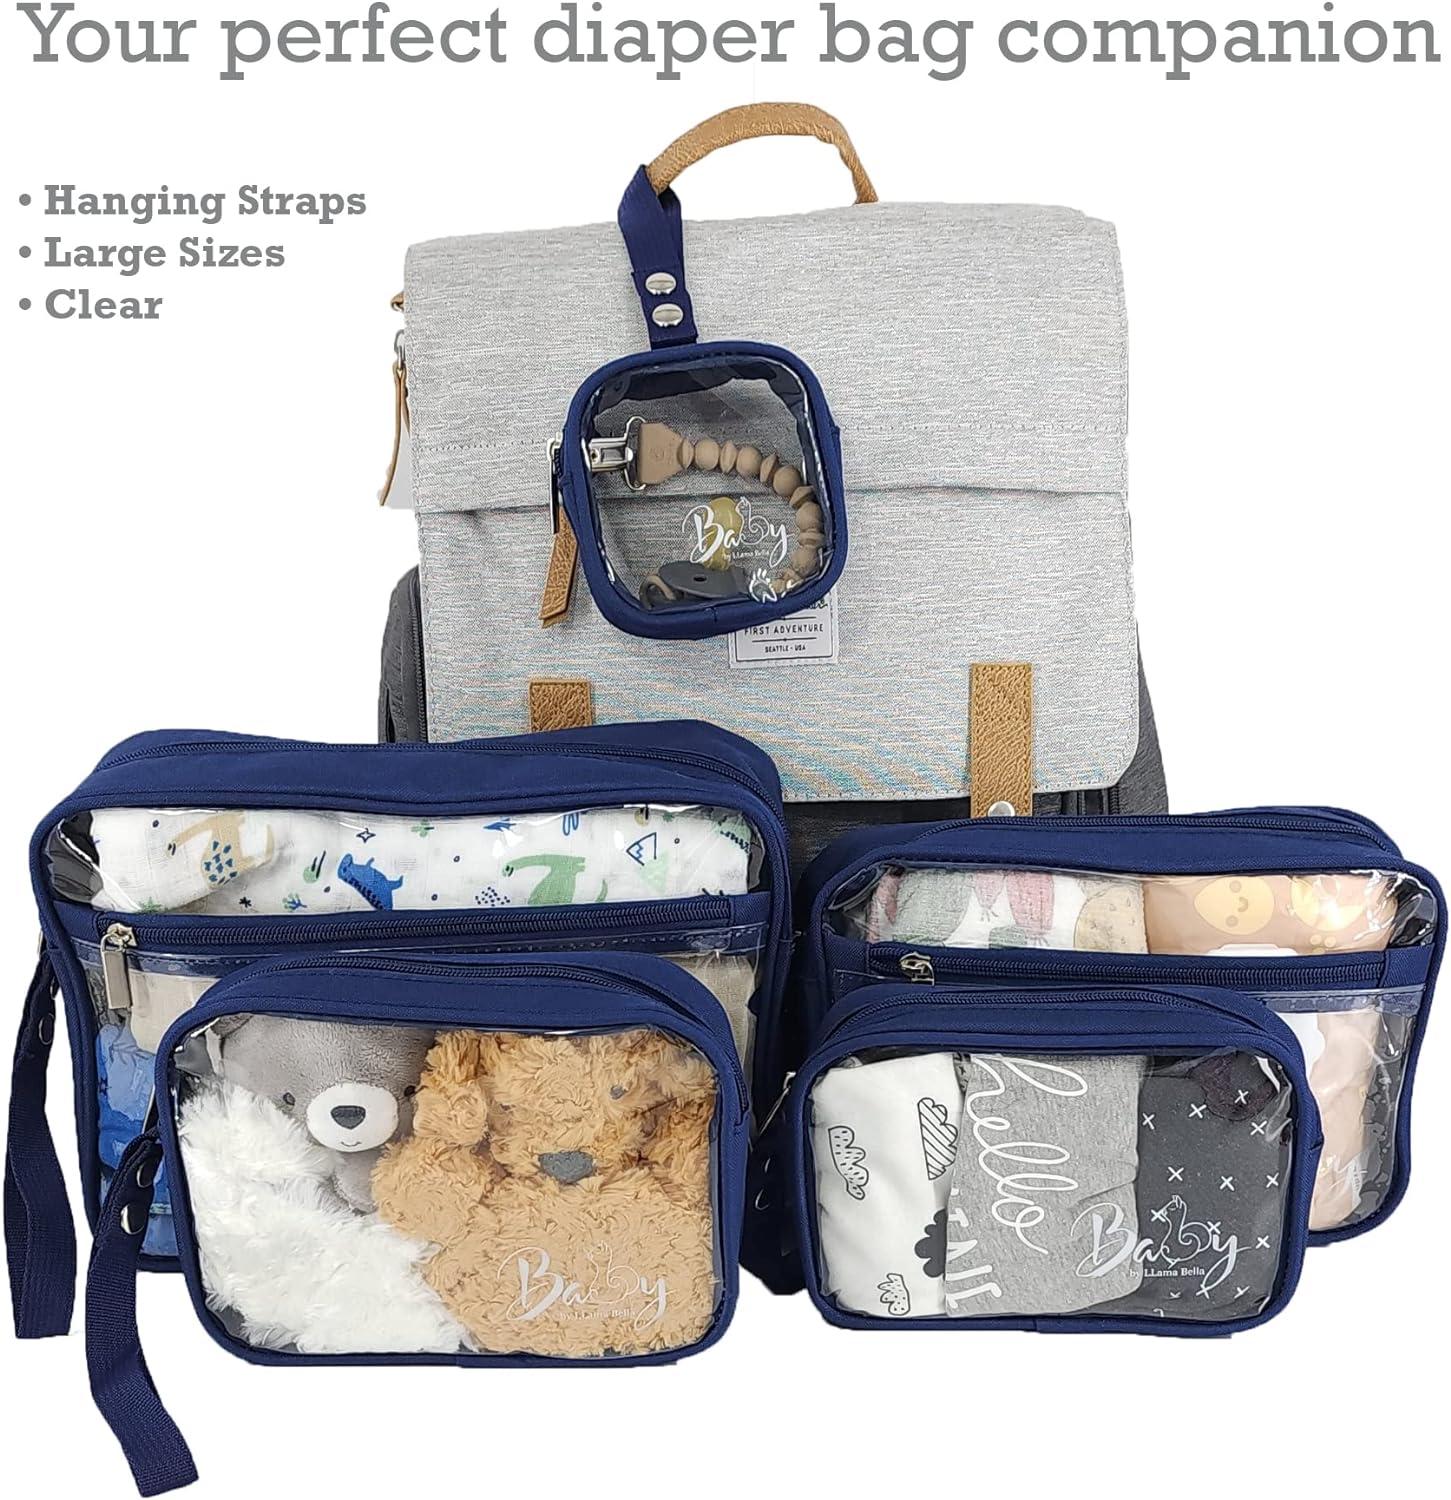 LLama Bella 5 Piece Diaper Bag Organizer Pouch Set, Clear with Zippers,  Straps and Pacifier Case - Nestable